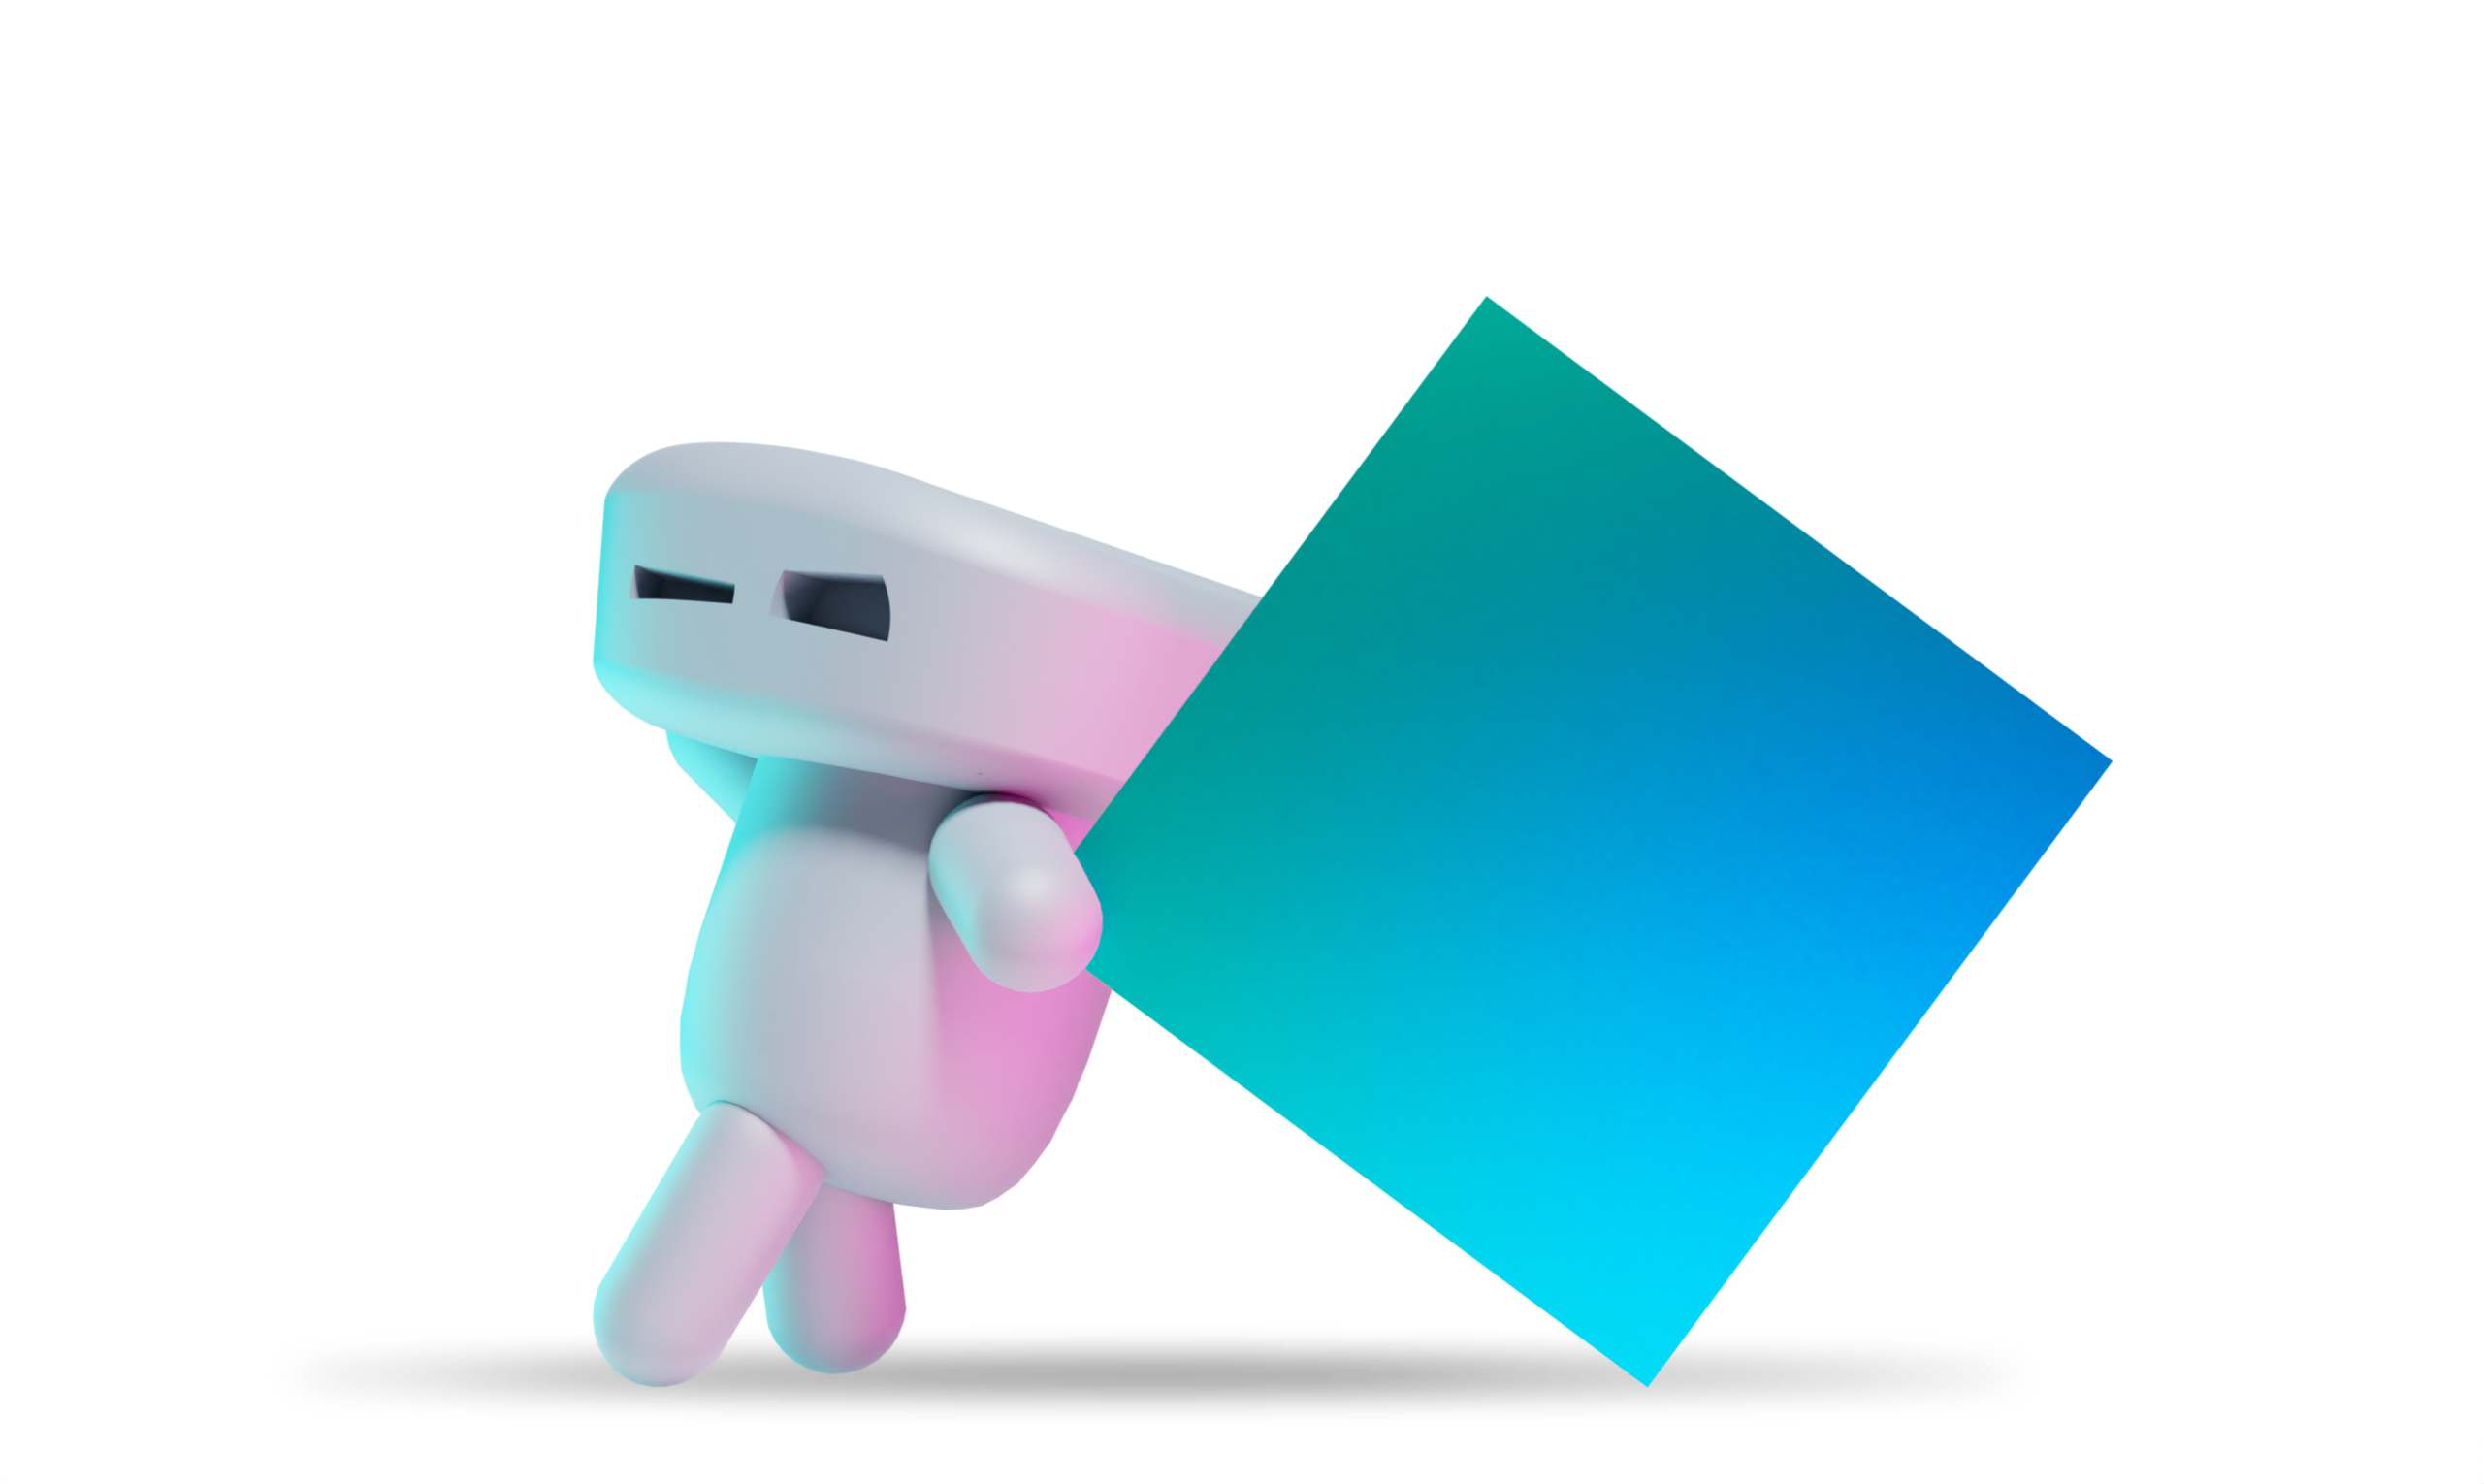 A cute 3D animated figure with pushing a rectangle